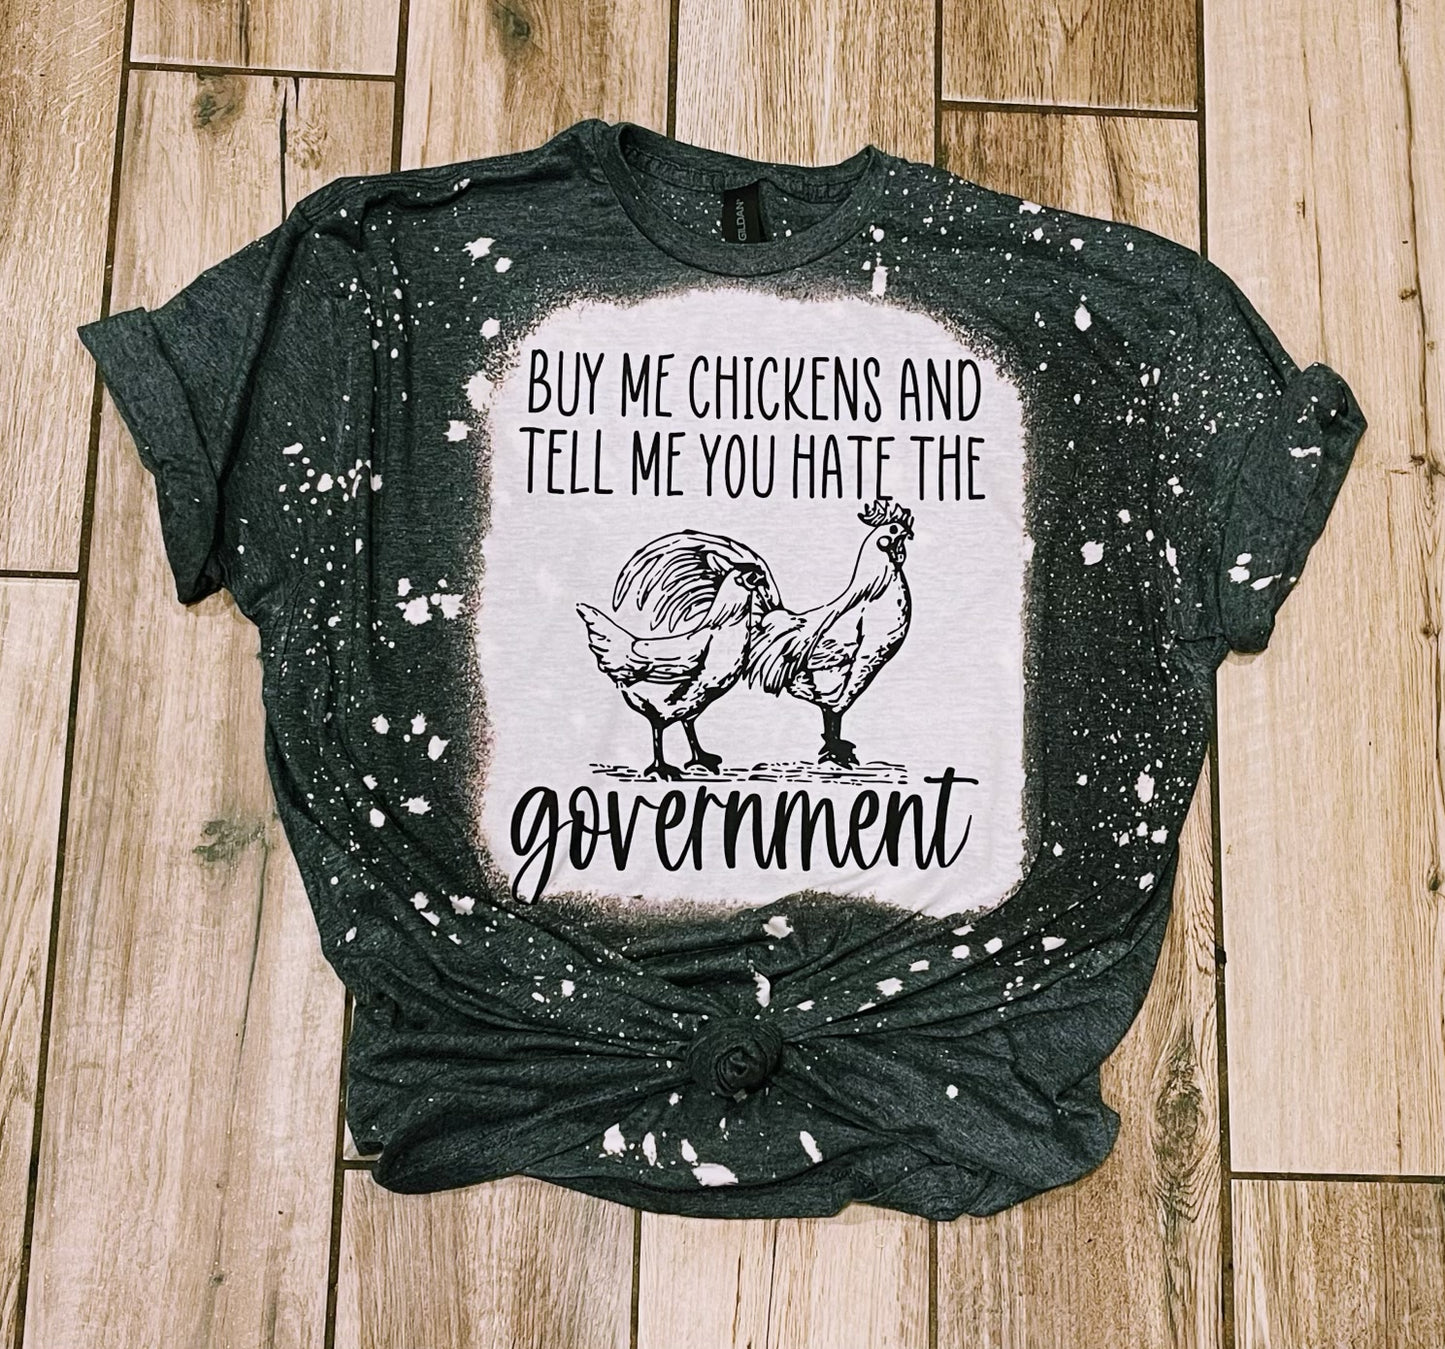 Buy Me Chickens and Tell Me You Hate the Government Bleached T-shirt, Funny Farmer Shirt, Chicken Lover Tee, Chicken Shirt, Gift Ideas